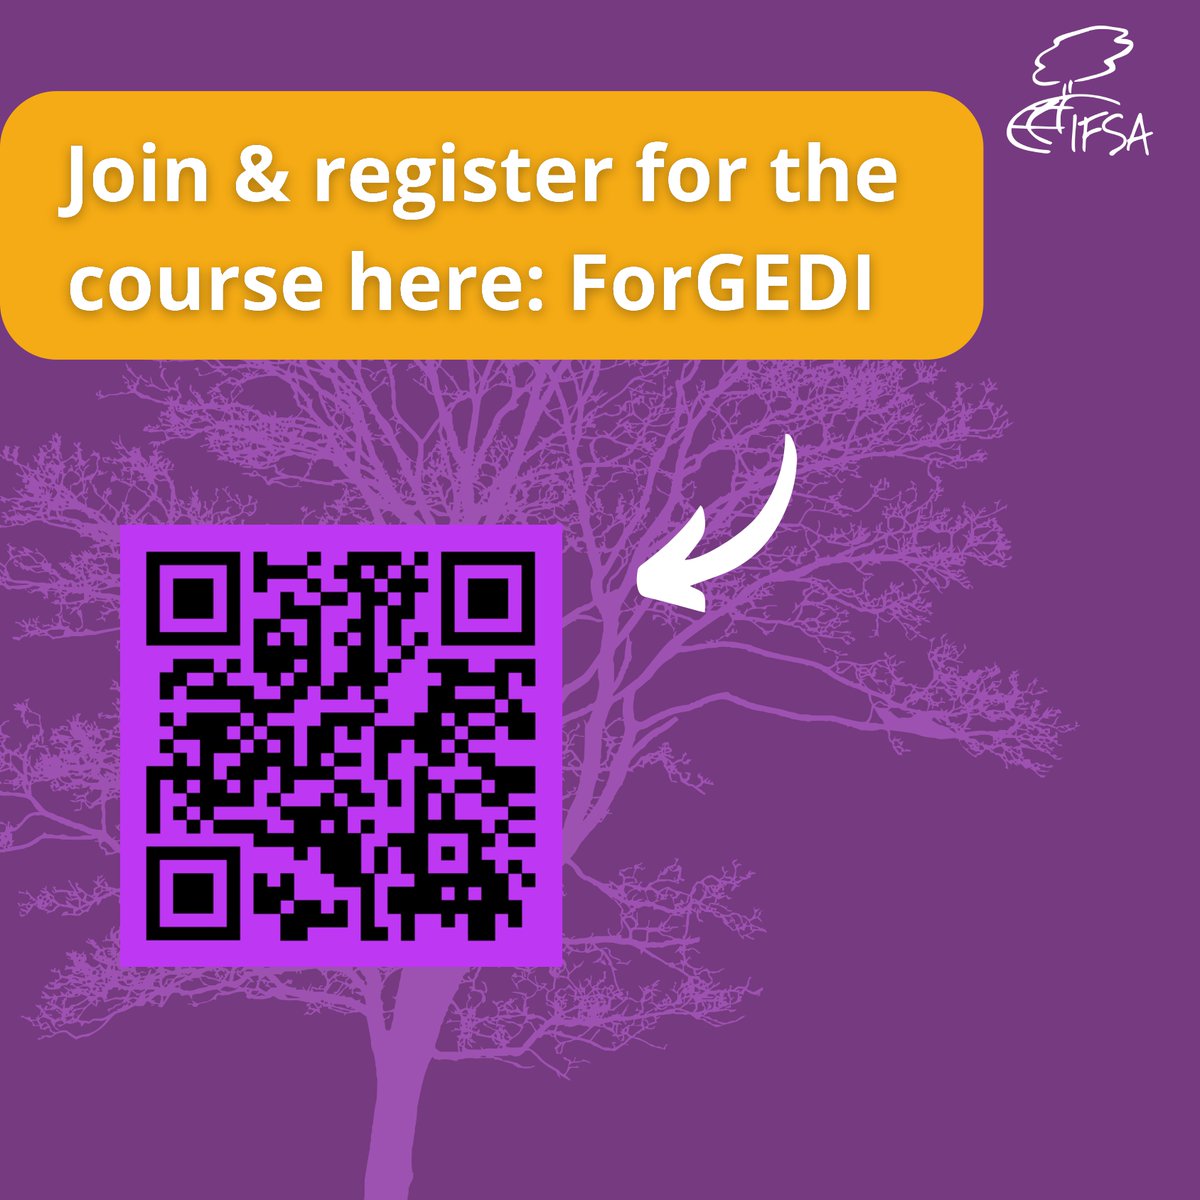 Introducing ForGEDI within forestry and related sectors. Watch the trailer for a sneak peek: lnkd.in/emmEXfVp Sign up for the 3-week course here: lnkd.in/e3gY-6Sk #GenderEquality #Diversity #Inclusion #Forestry #ForGEDI